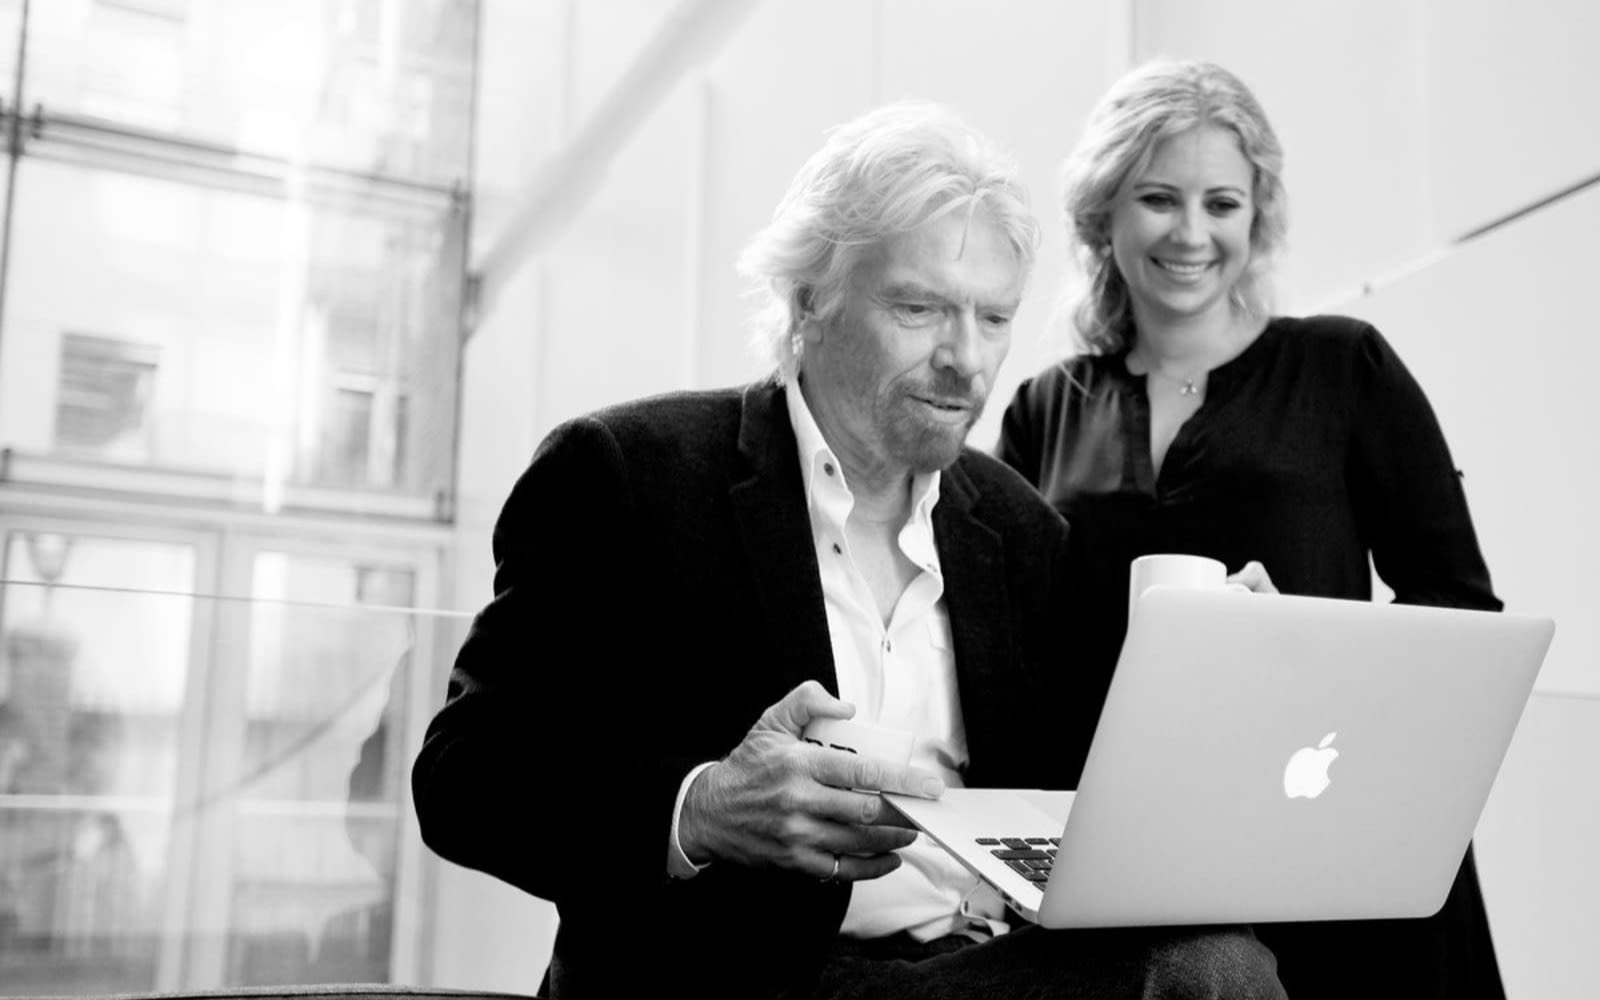 Black and White photo of Richard Branson using a laptop with Holly Branson standing next to him looking over his shoulder at the screen